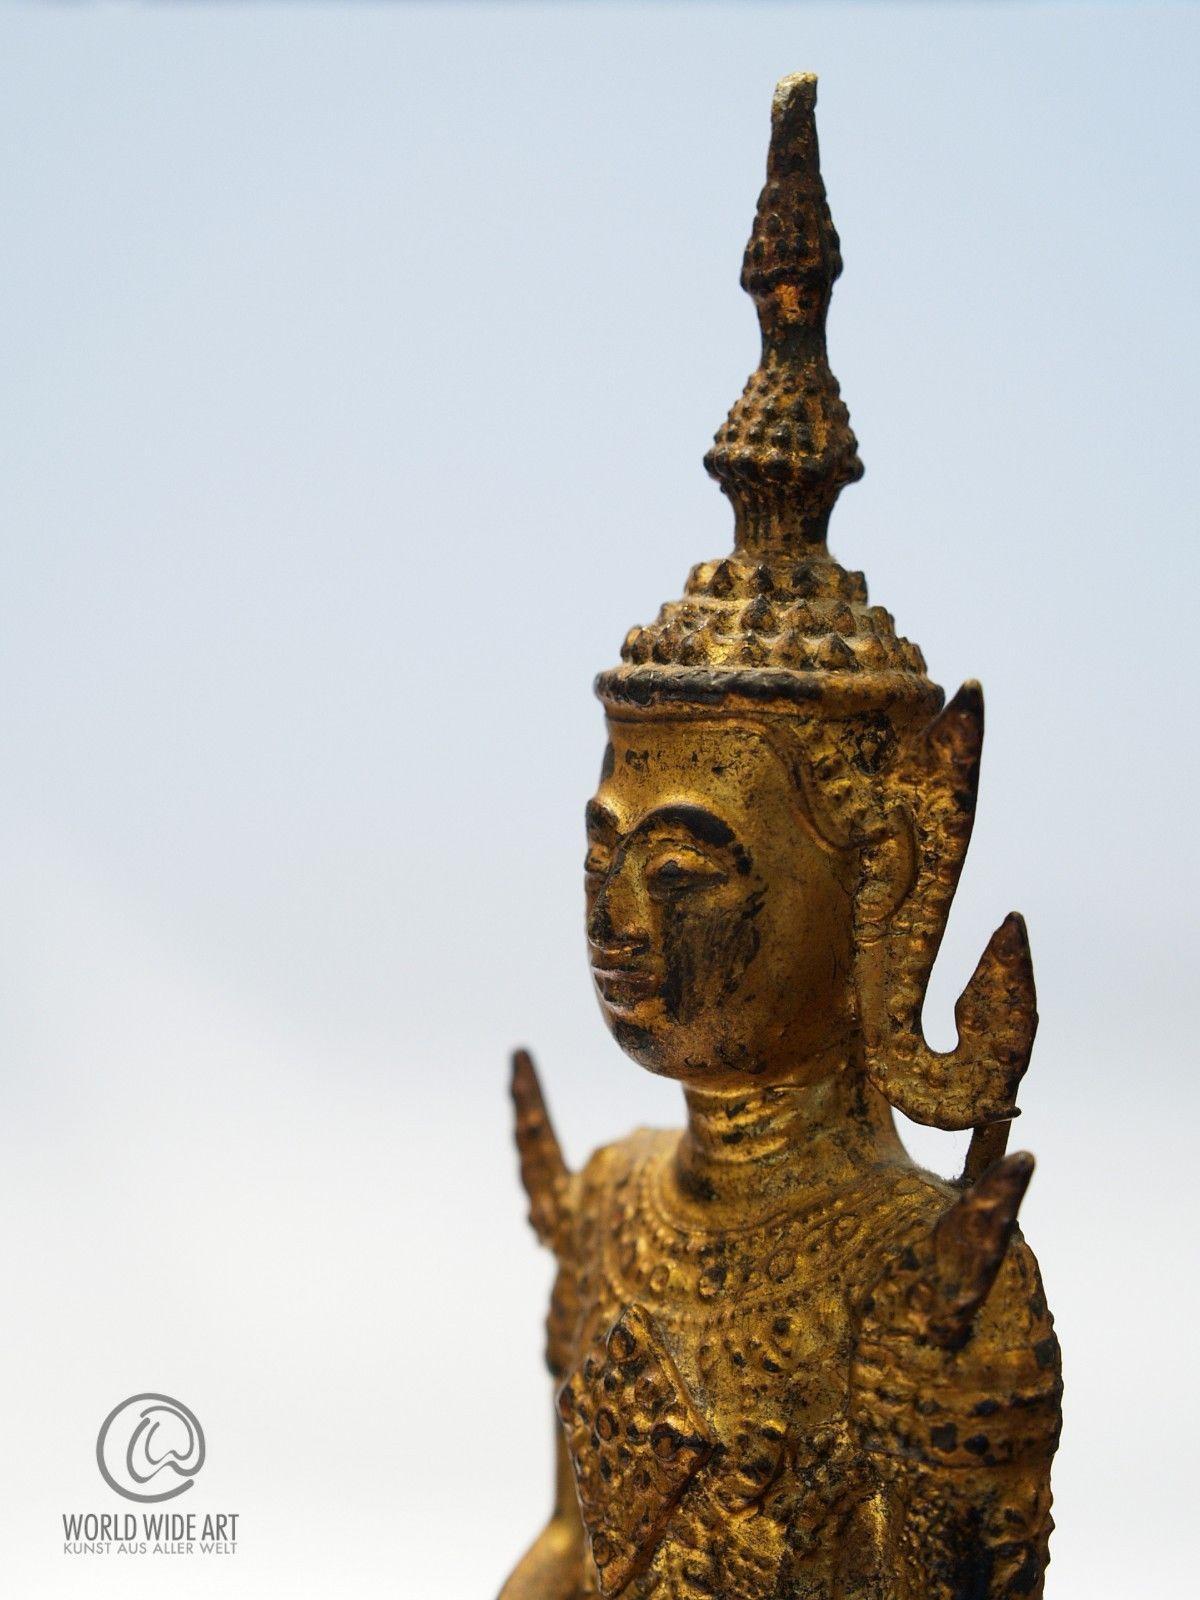 EXCEPTIONAL ANTIQUE BUDDHA, BURMA, EARLY 19th CENTURY, GILDED BRONZE For Sale 3